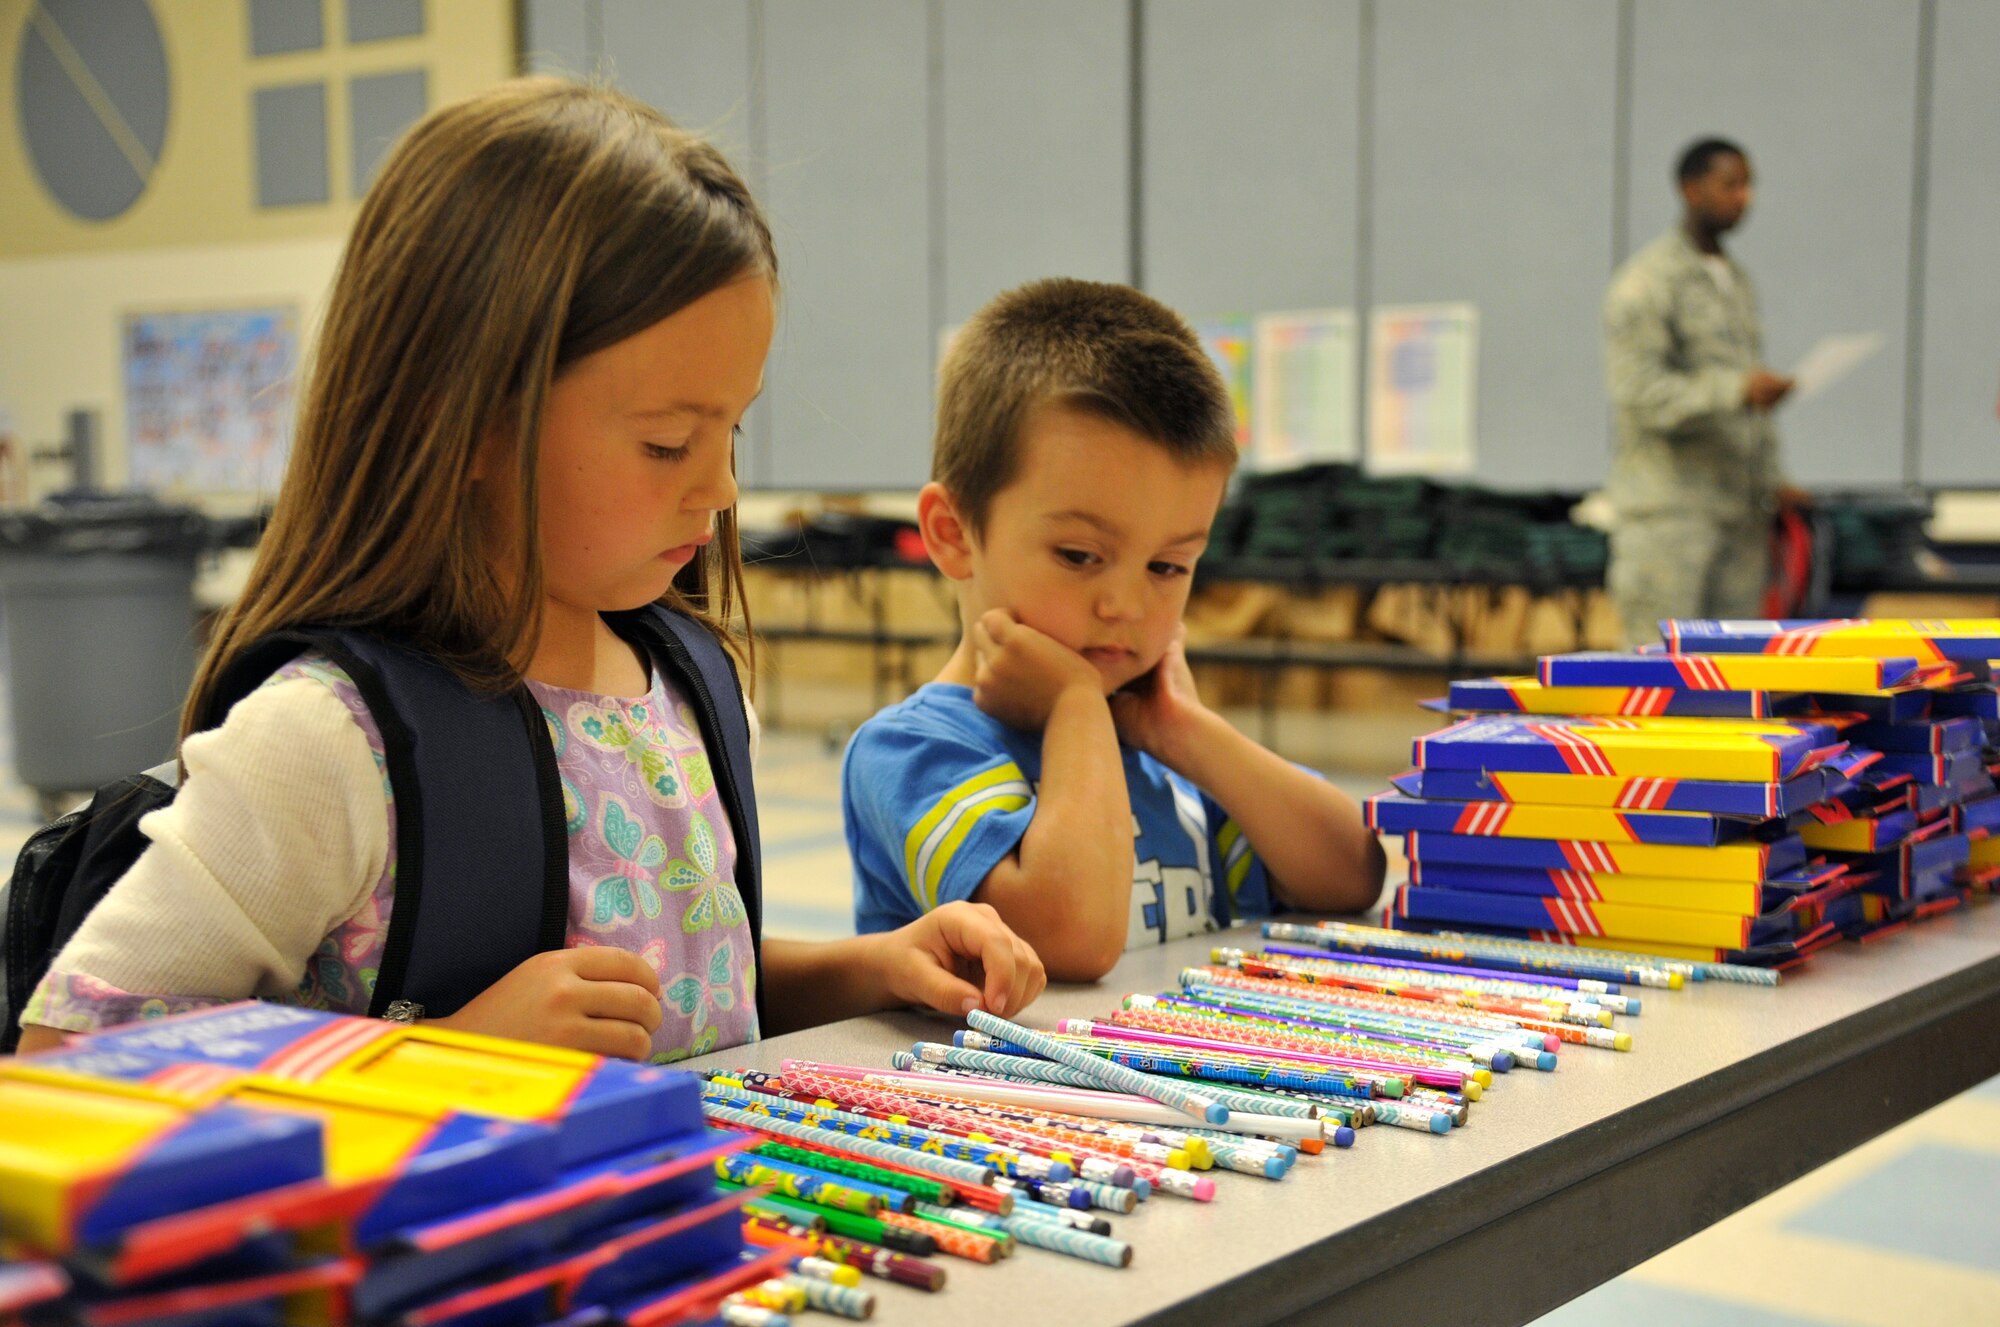 Isabelle Gonzalez and her brother Ethan decide which pencil to take for school during the Back-to-School Brigade in the Michael Anderson Elementary School gymnasium at Fairchild Air Force Base, Washington, Aug. 7, 2014. The Back-to-School Brigade is hosted by Operation Homefront. Operation Homefront is a non-profit organization that provides assistance for United States military troops and their families as well as wounded servicemen when they return home. (U.S. Air Force photo by Senior Airman Ryan Zeski/Released)